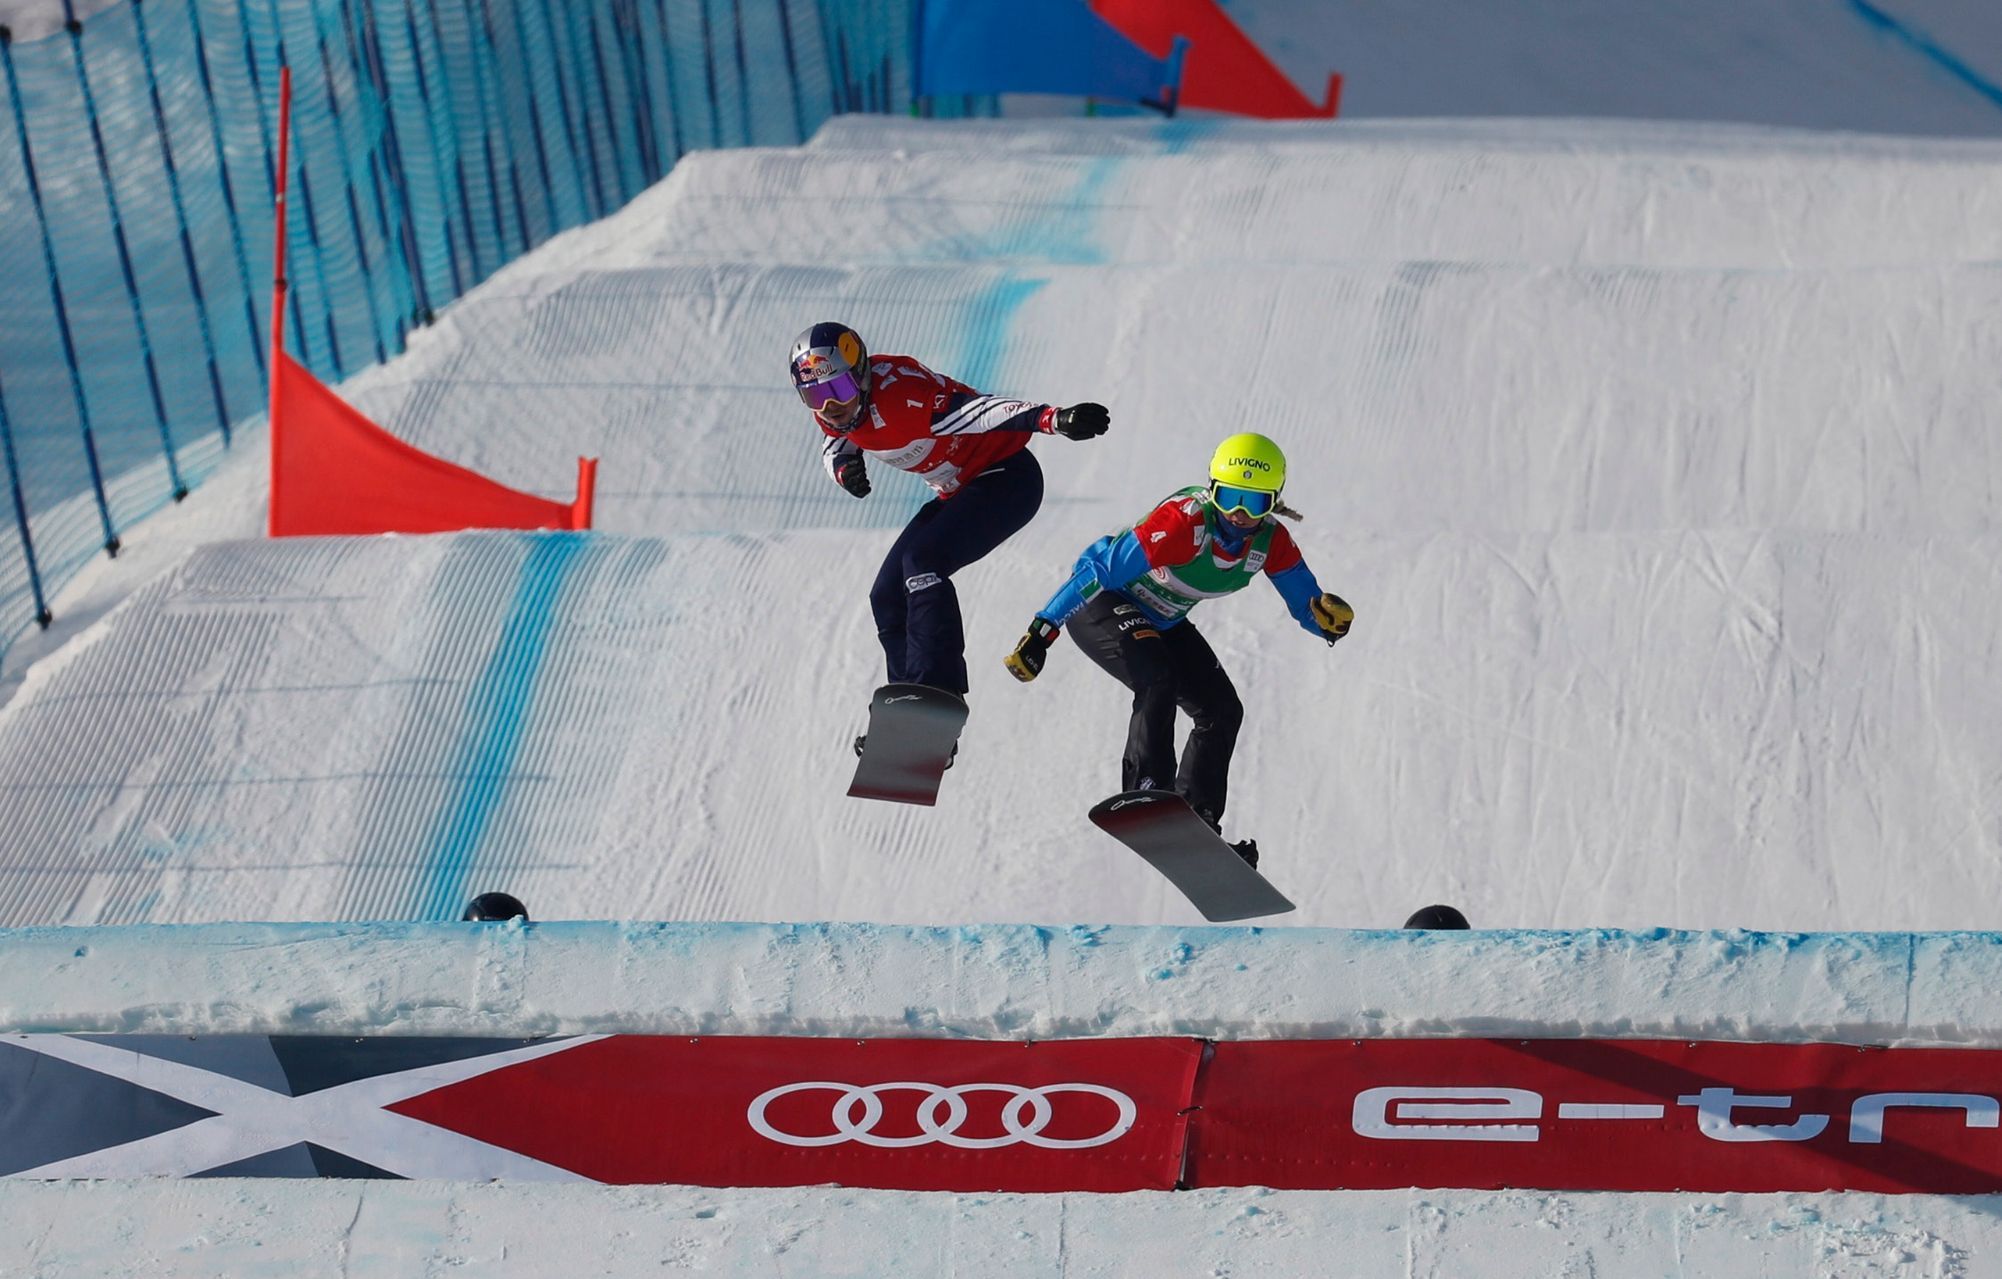 Adamczyková’s snowboard crosser finished in the quarterfinals on his return to SP